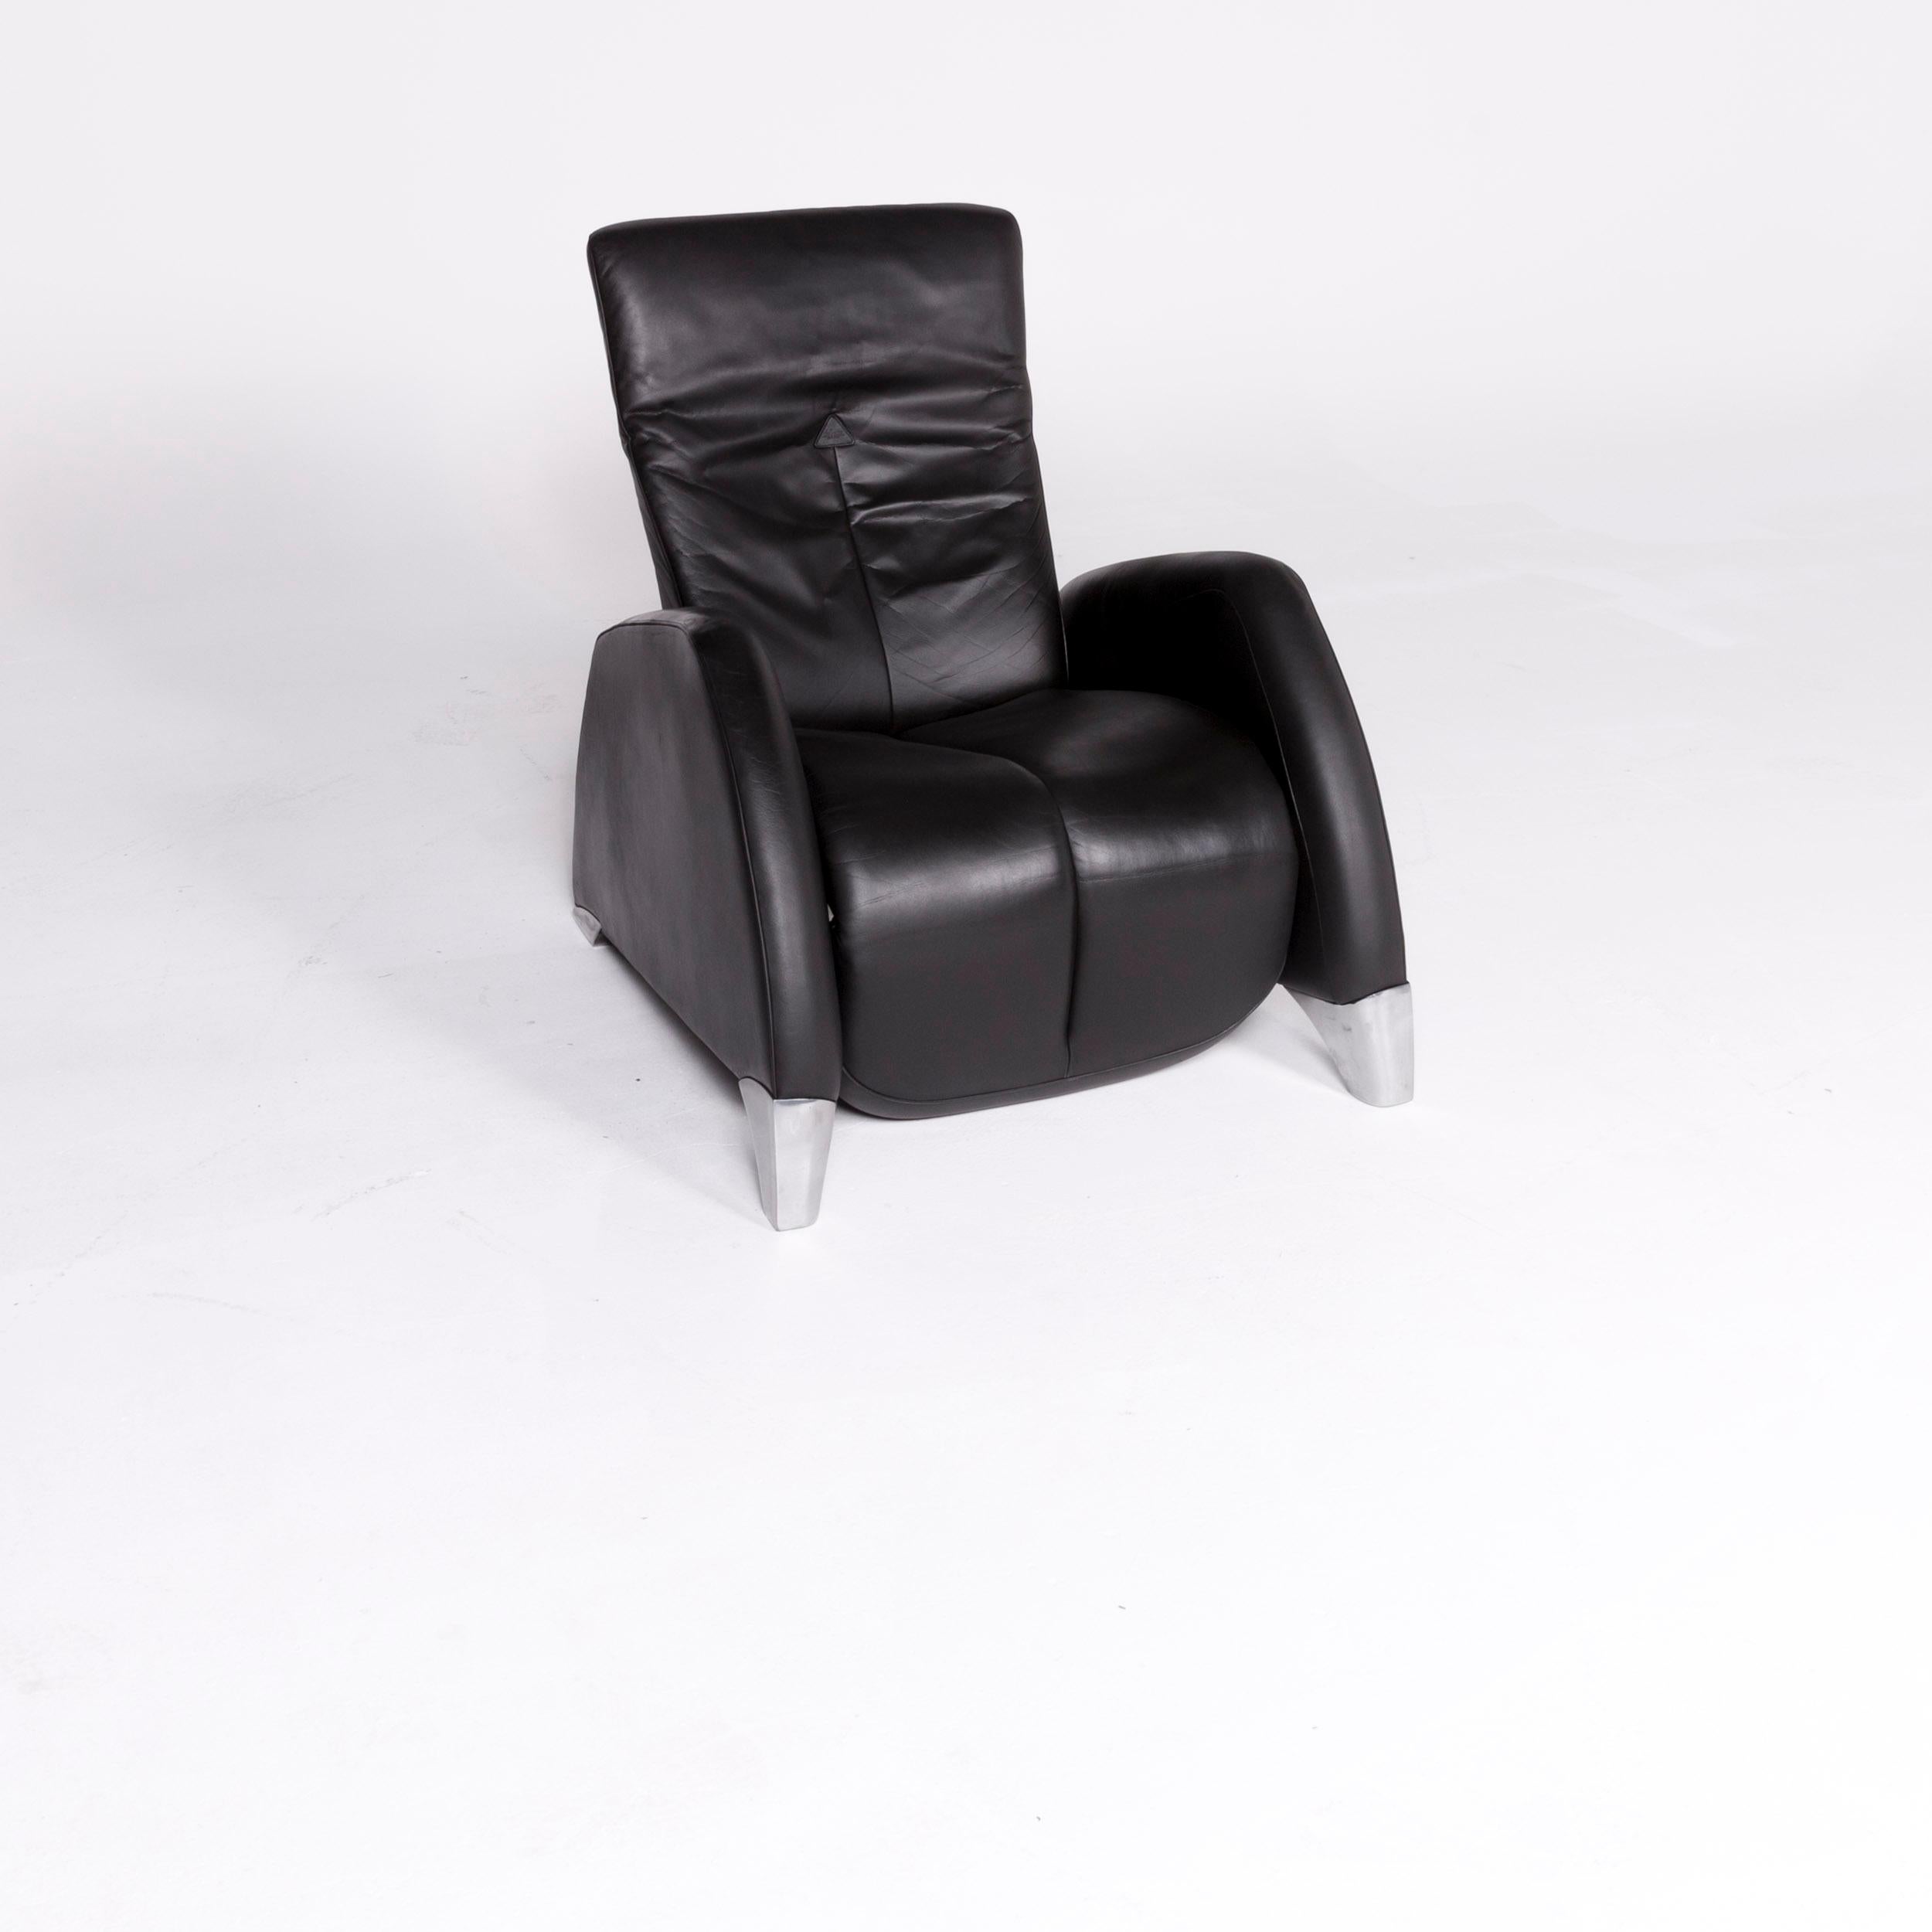 We bring to you a de Sede designer leather armchair black genuine leather chair relax function.

Product measurements in centimeters:

Depth 107
Width 79
Height 96
Seat-height 43
Rest-height 60
Seat-depth 55
Seat-width 53
Back-height